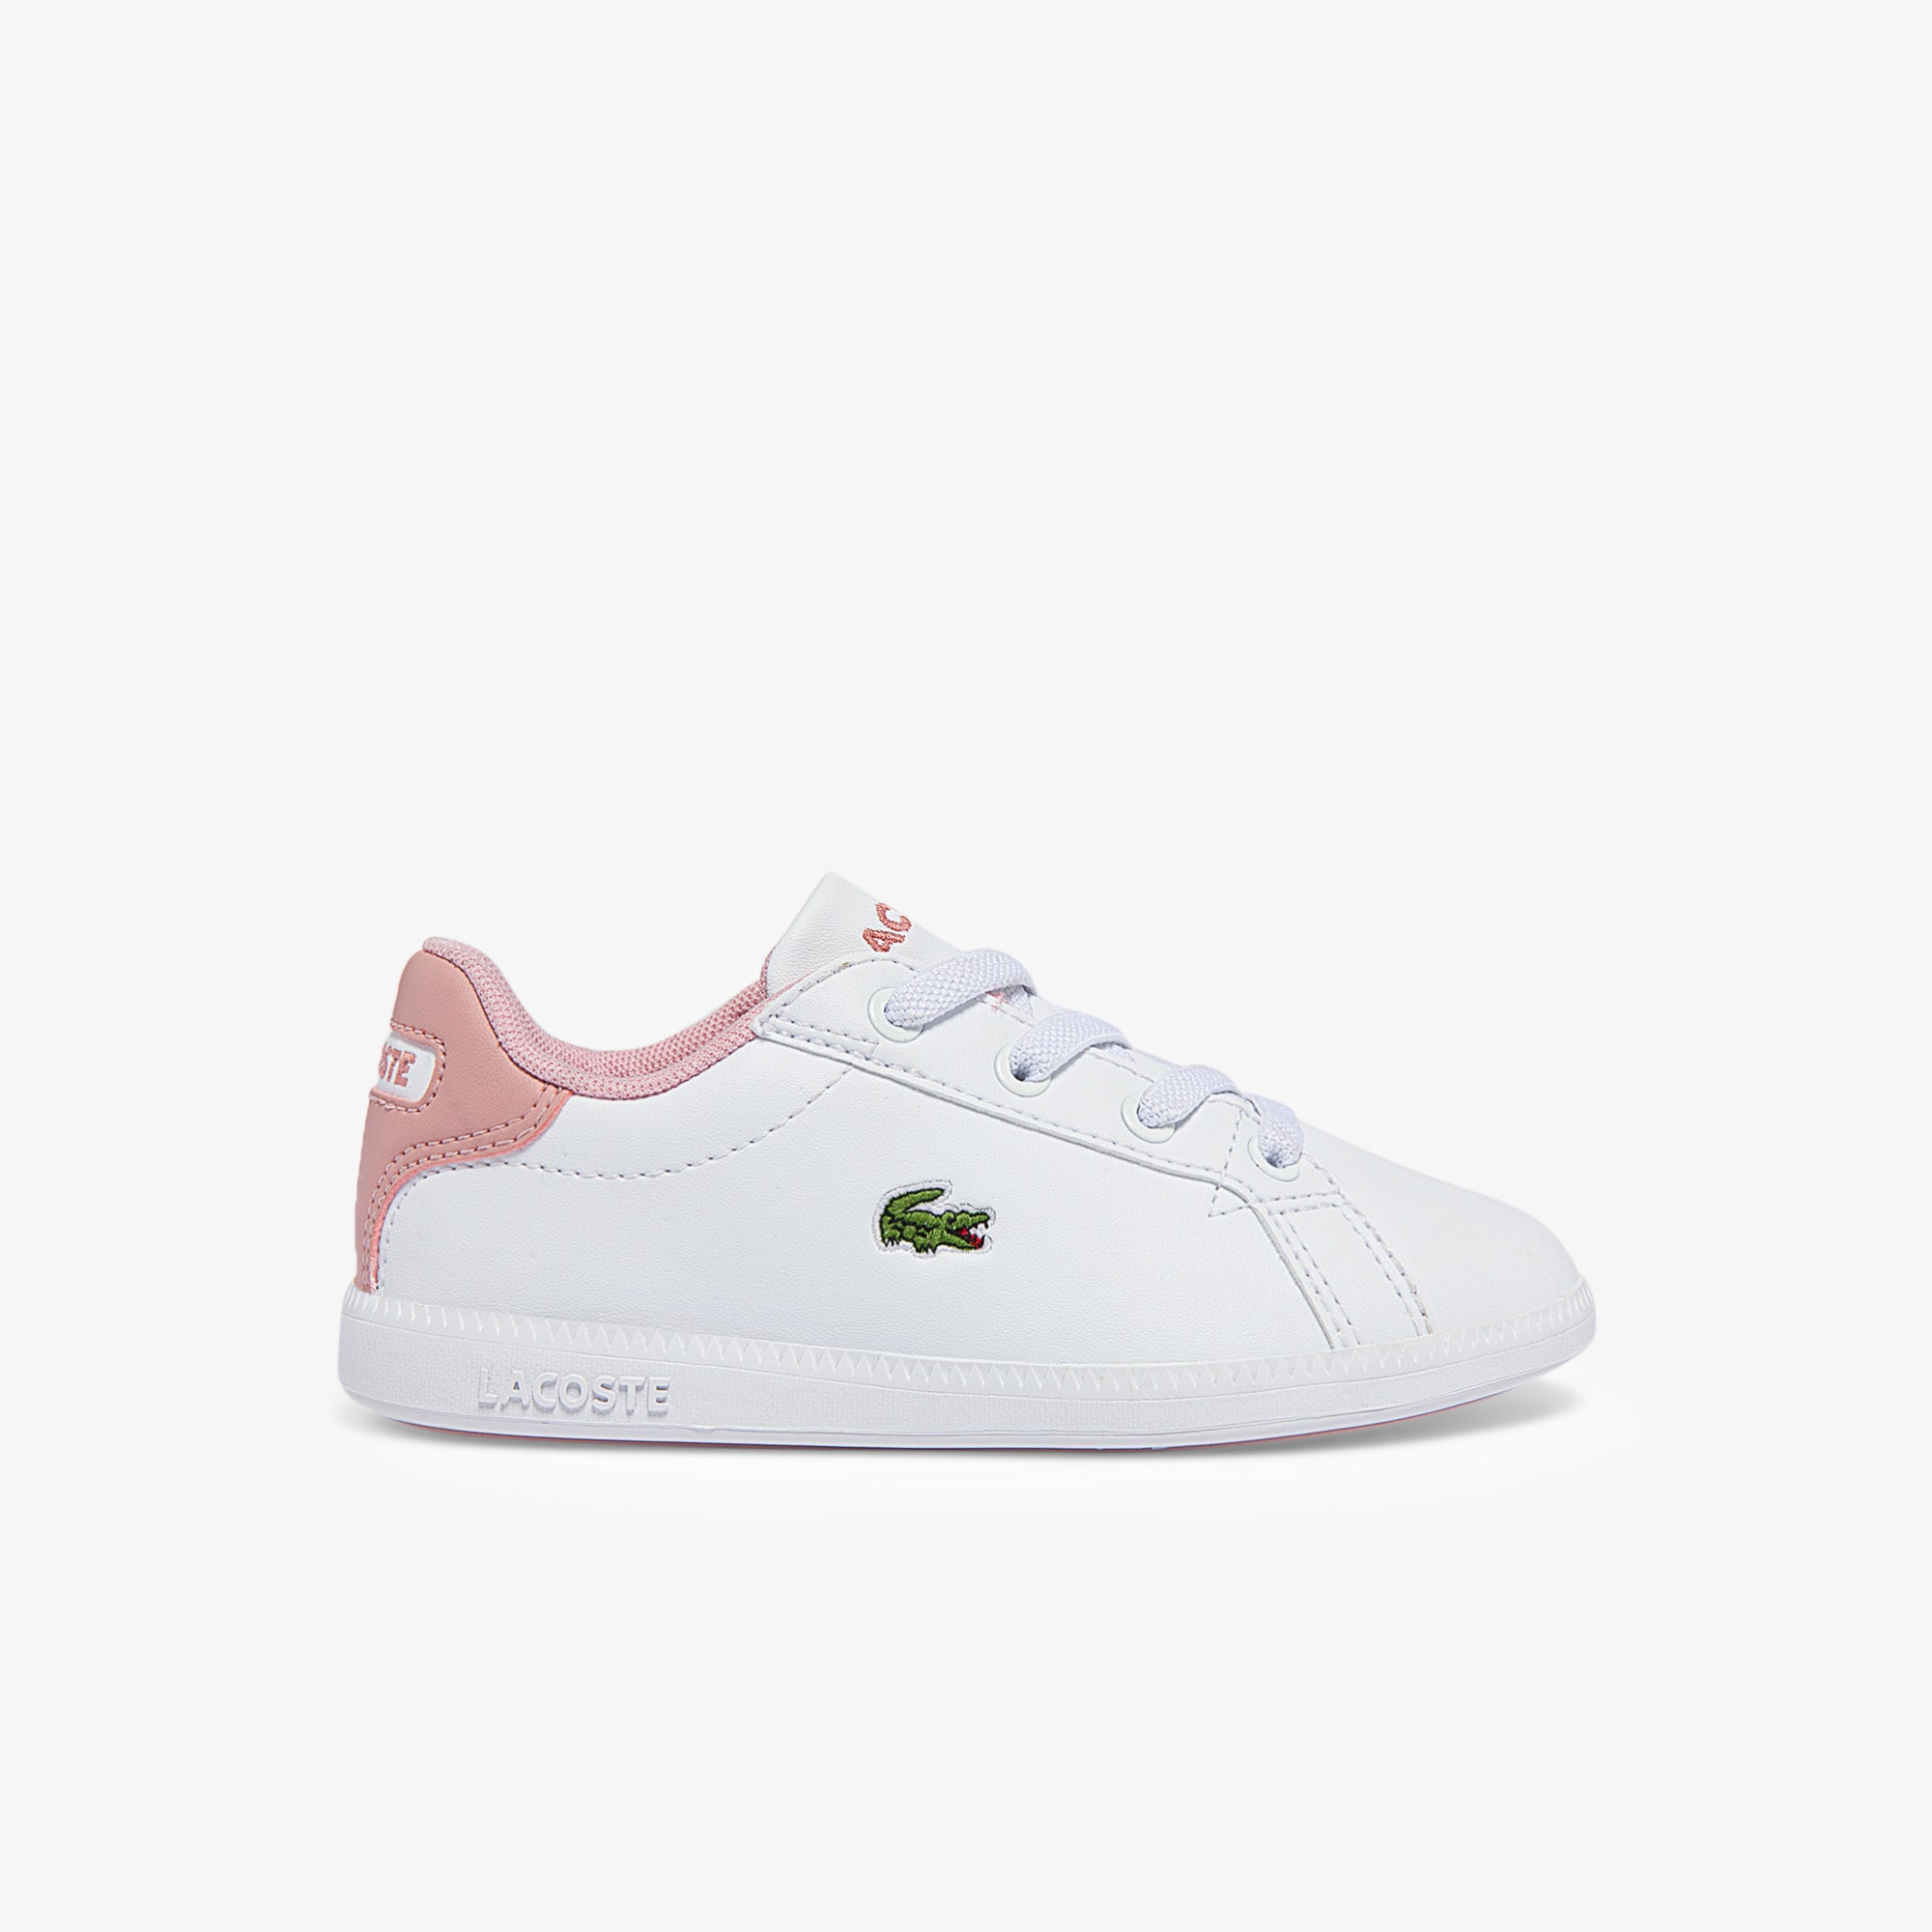 Lacoste Infants' Graduate Synthetic Trainers Size 5 UK Kids White & Light Pink